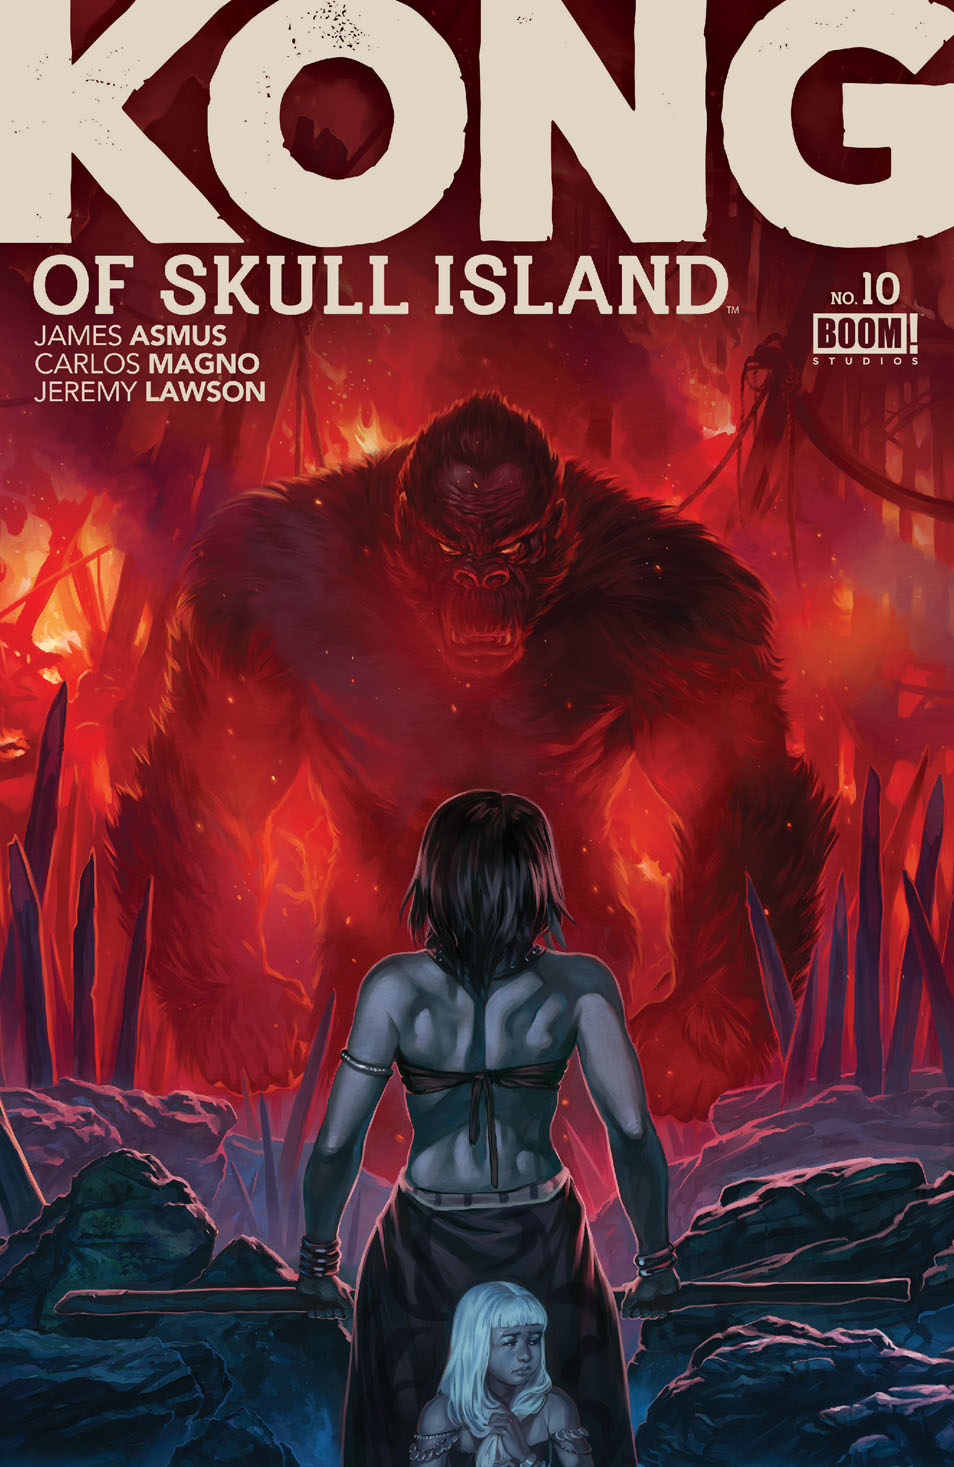 This image is the cover for the book Kong of Skull Island #10, Kong of Skull Island